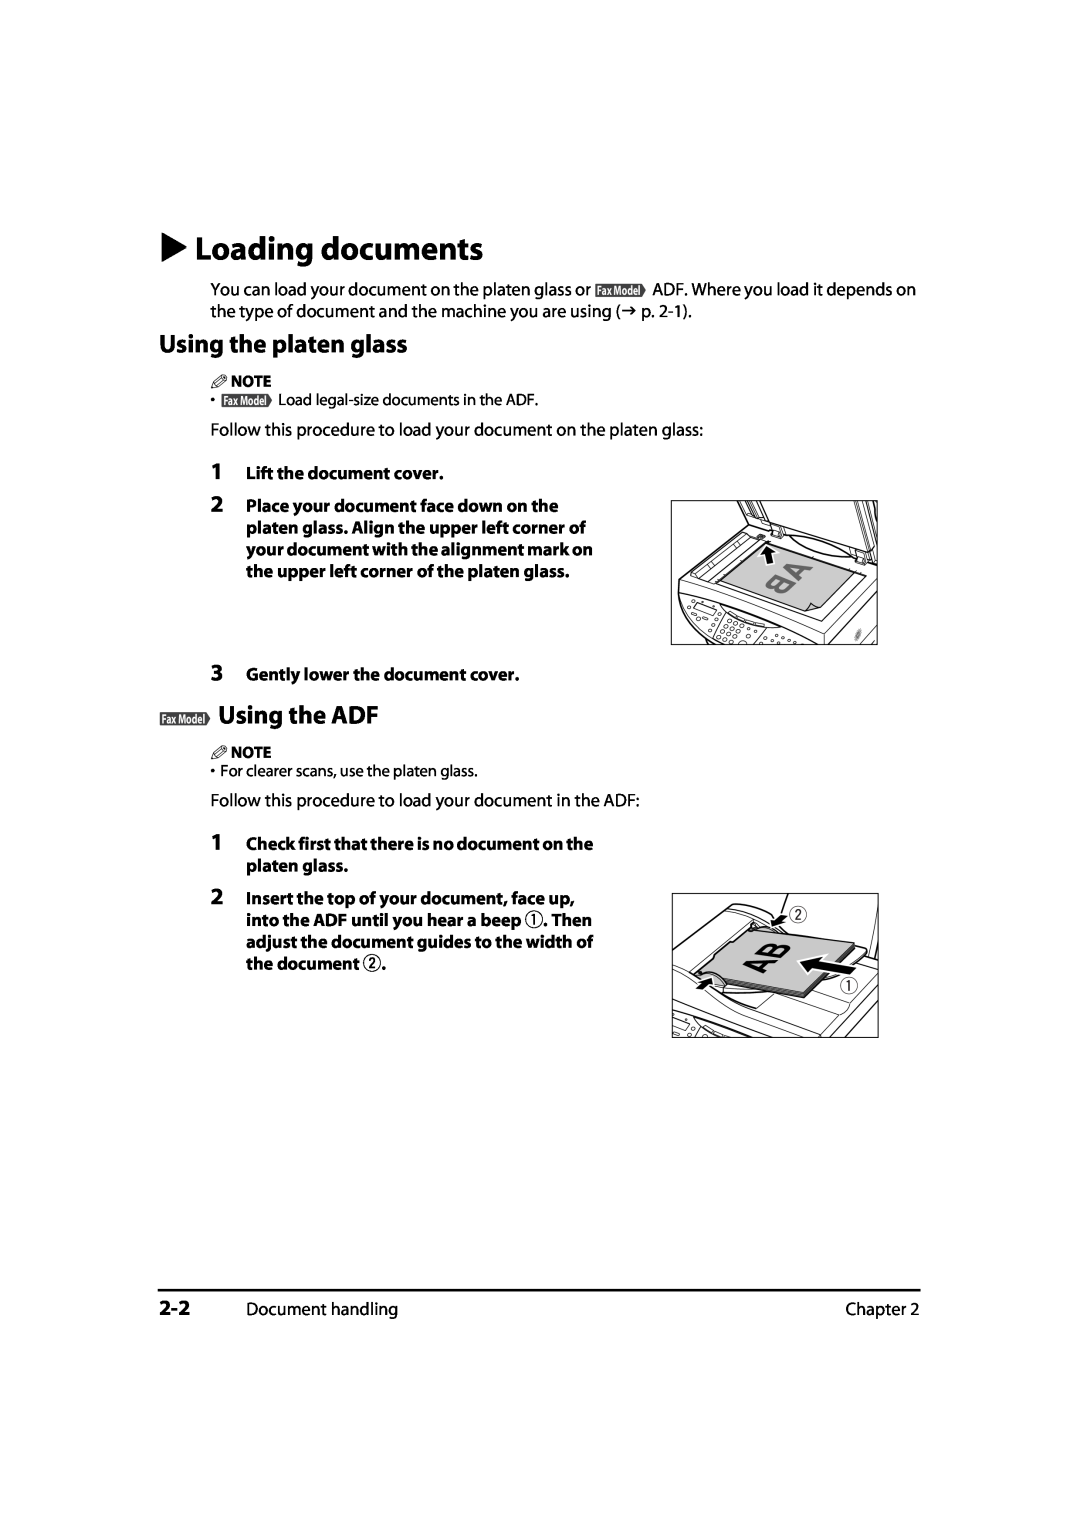 Canon MultiPASS MP730 Loading documents, Using the platen glass, Fax Model Using the ADF, Gently lower the document cover 